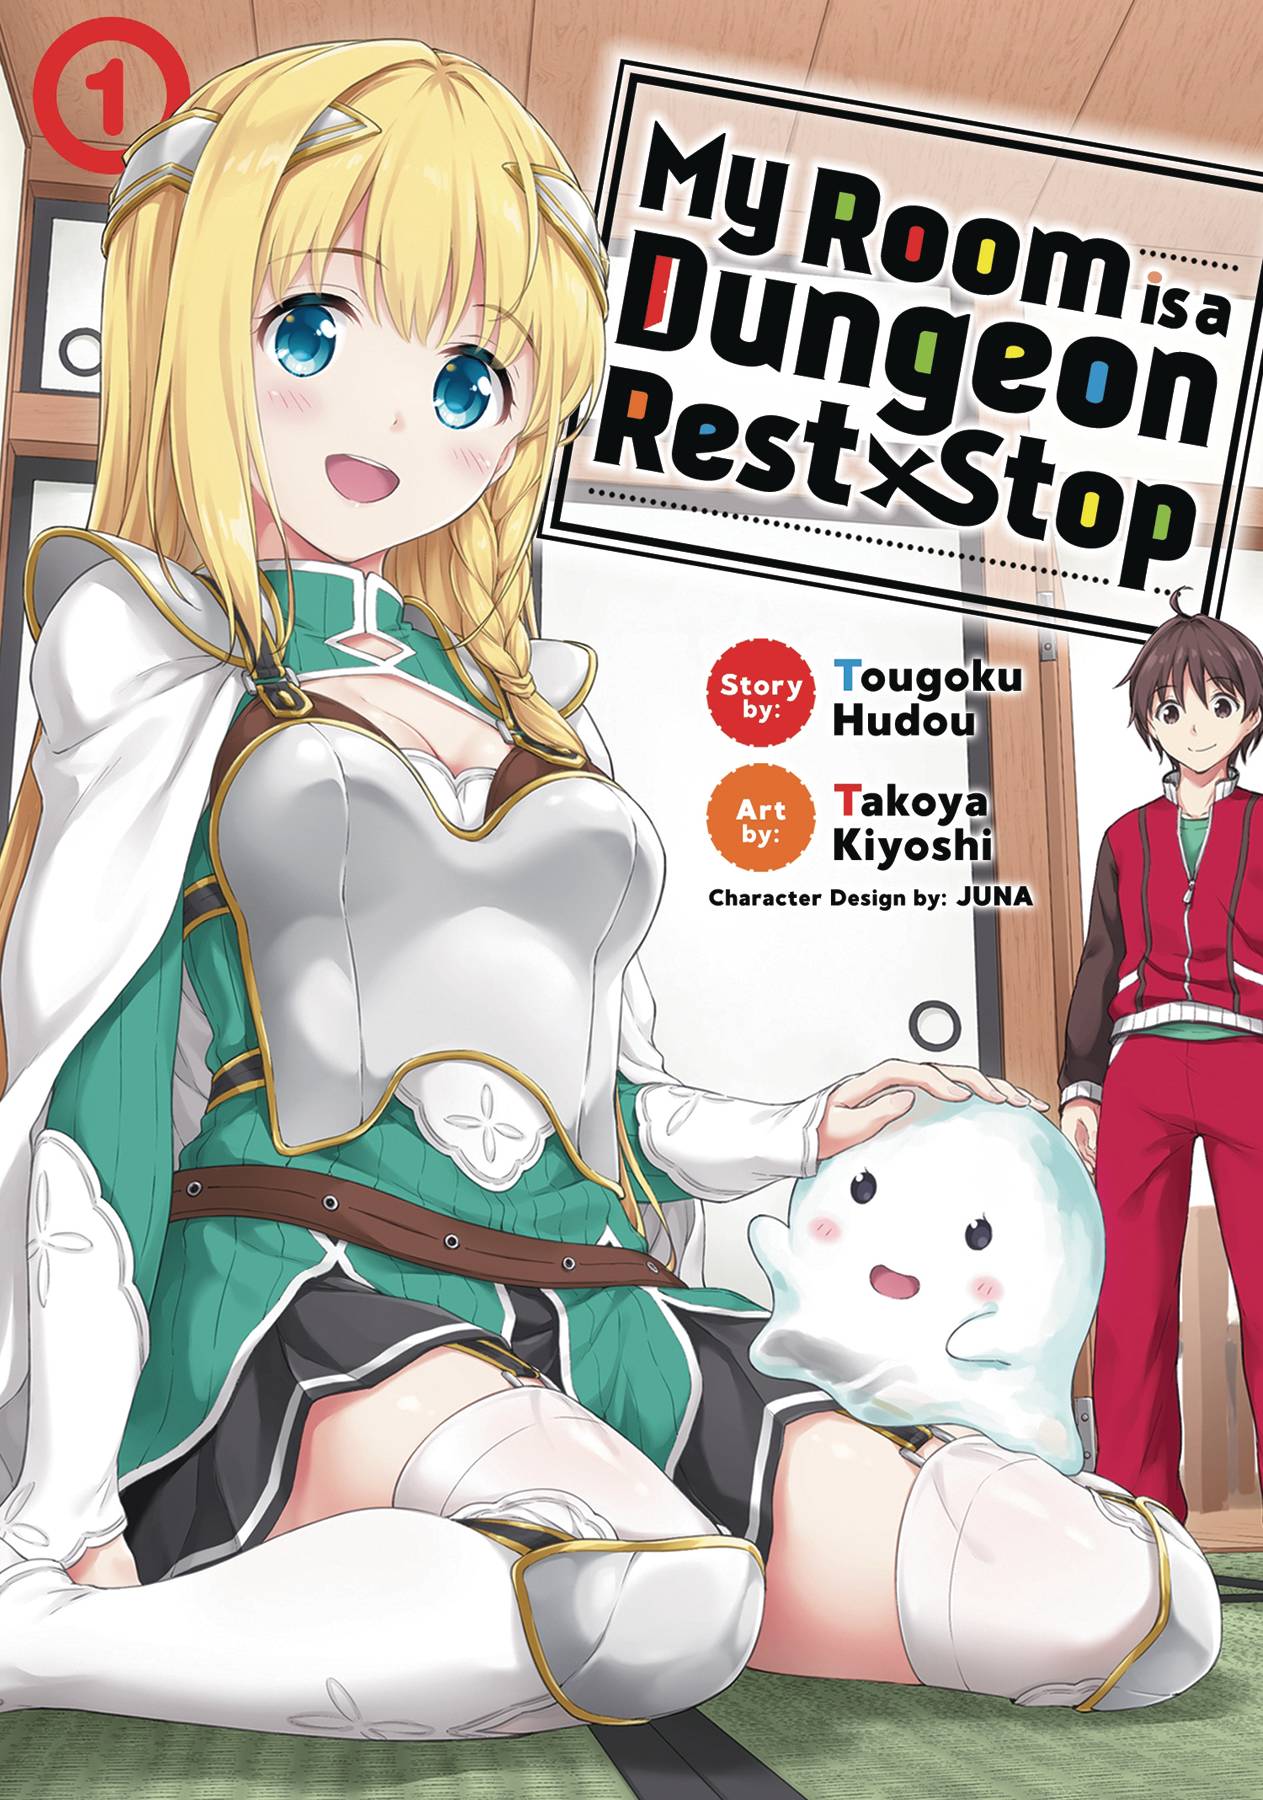 My Room is a Dungeon Rest Stop Manga Volume 1